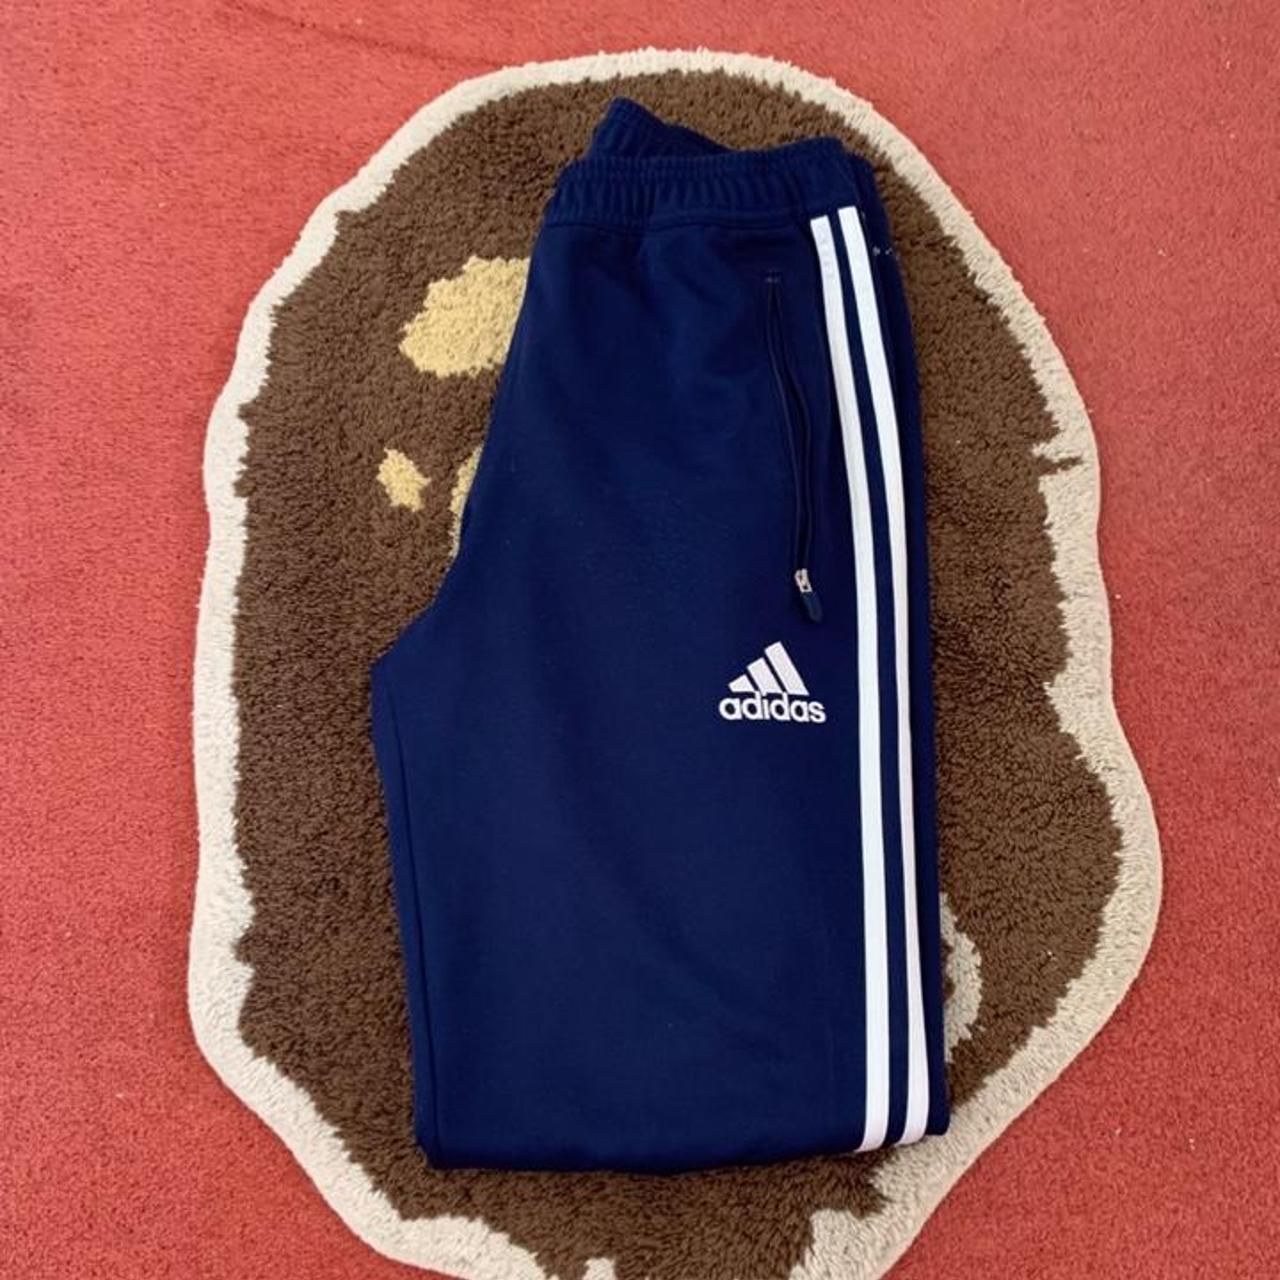 Adidas blue joggers white 3 stripes Zip pockets and... - Depop